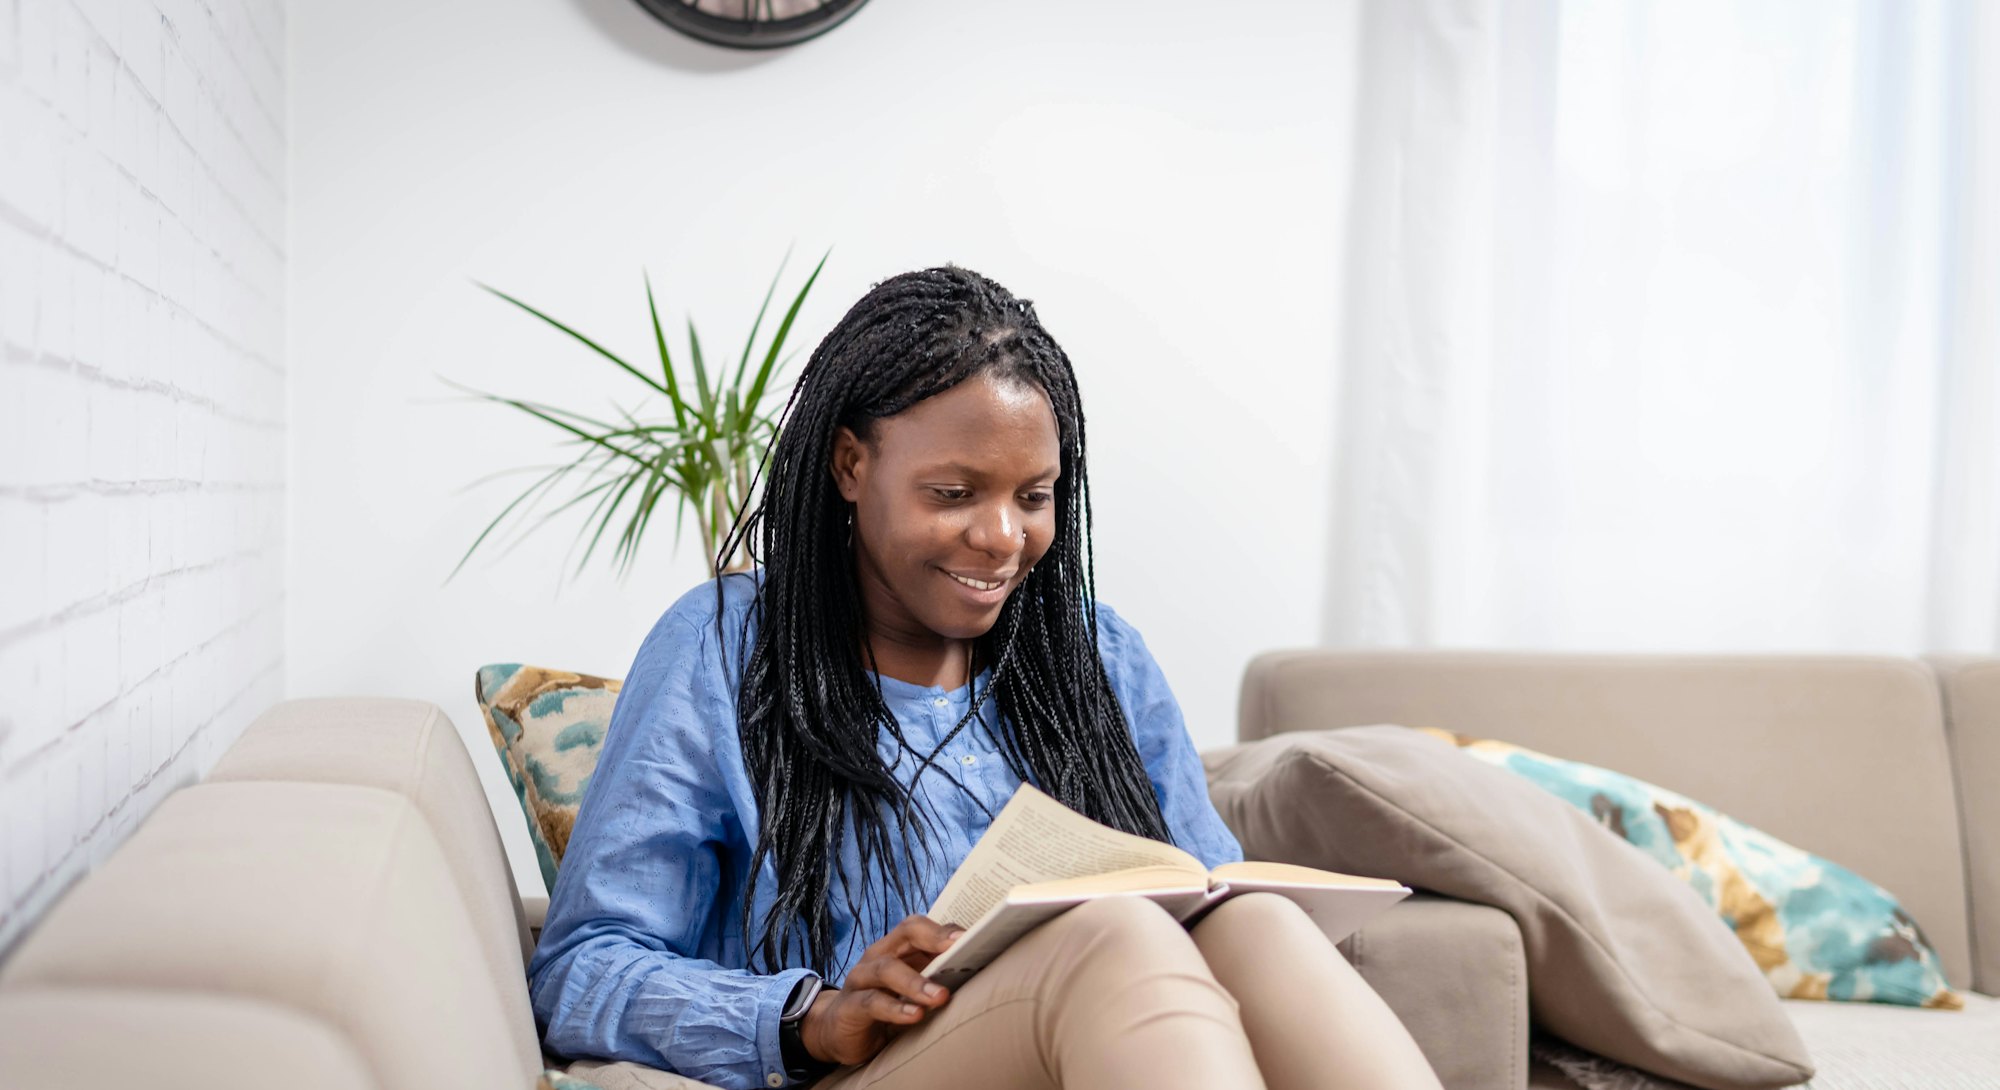 Beautiful african american smiling woman reading a book at home.